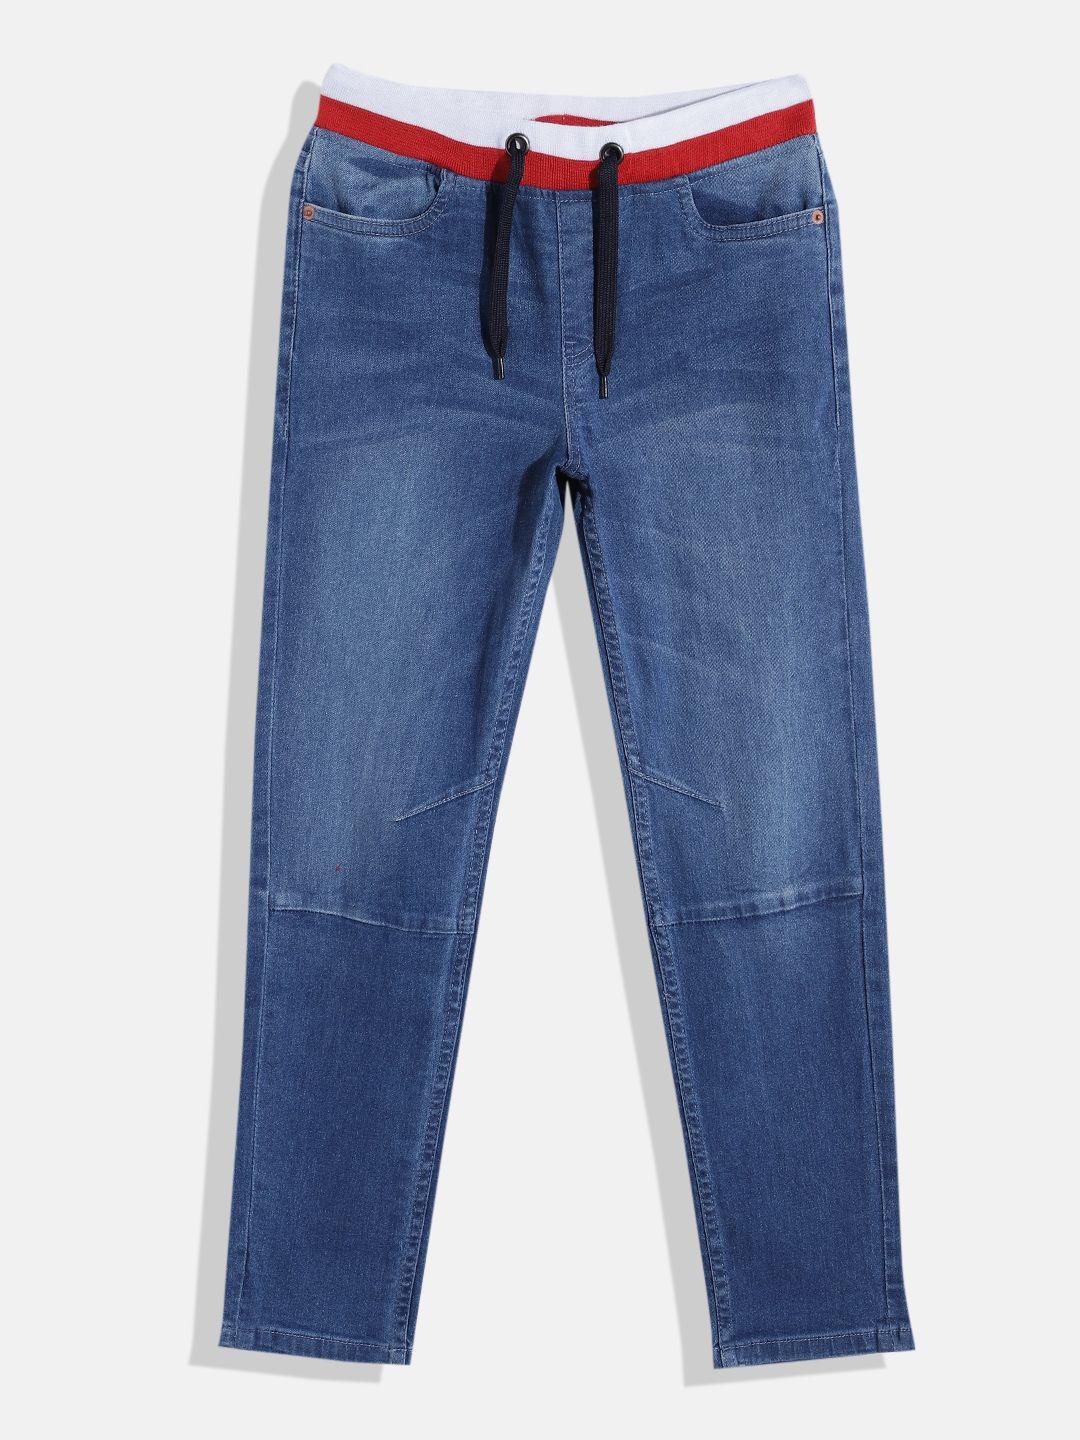 allen-solly-junior-boys-light-fade-stretchable-jeans